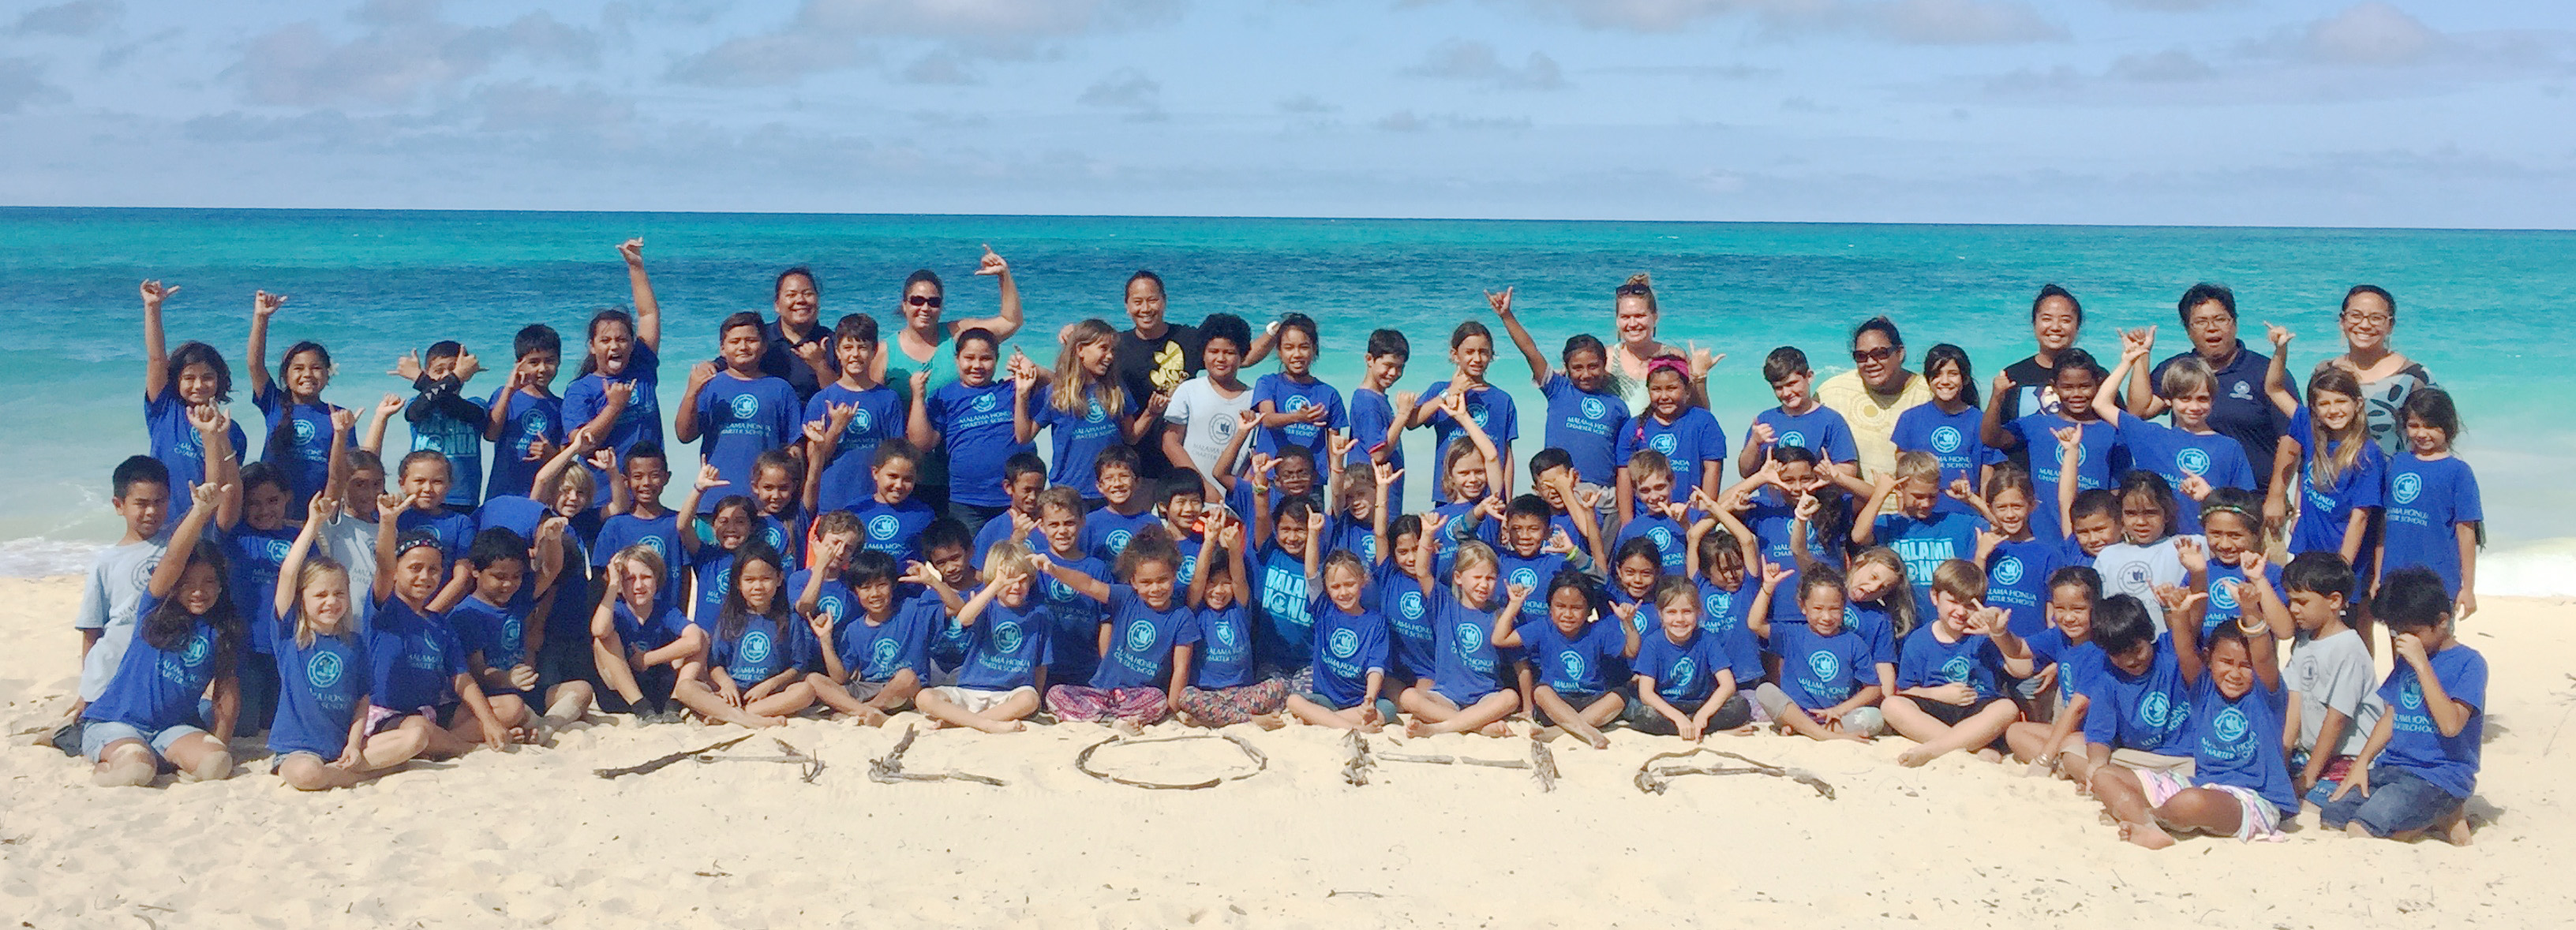 group photo of students on beach with aloha written in sand